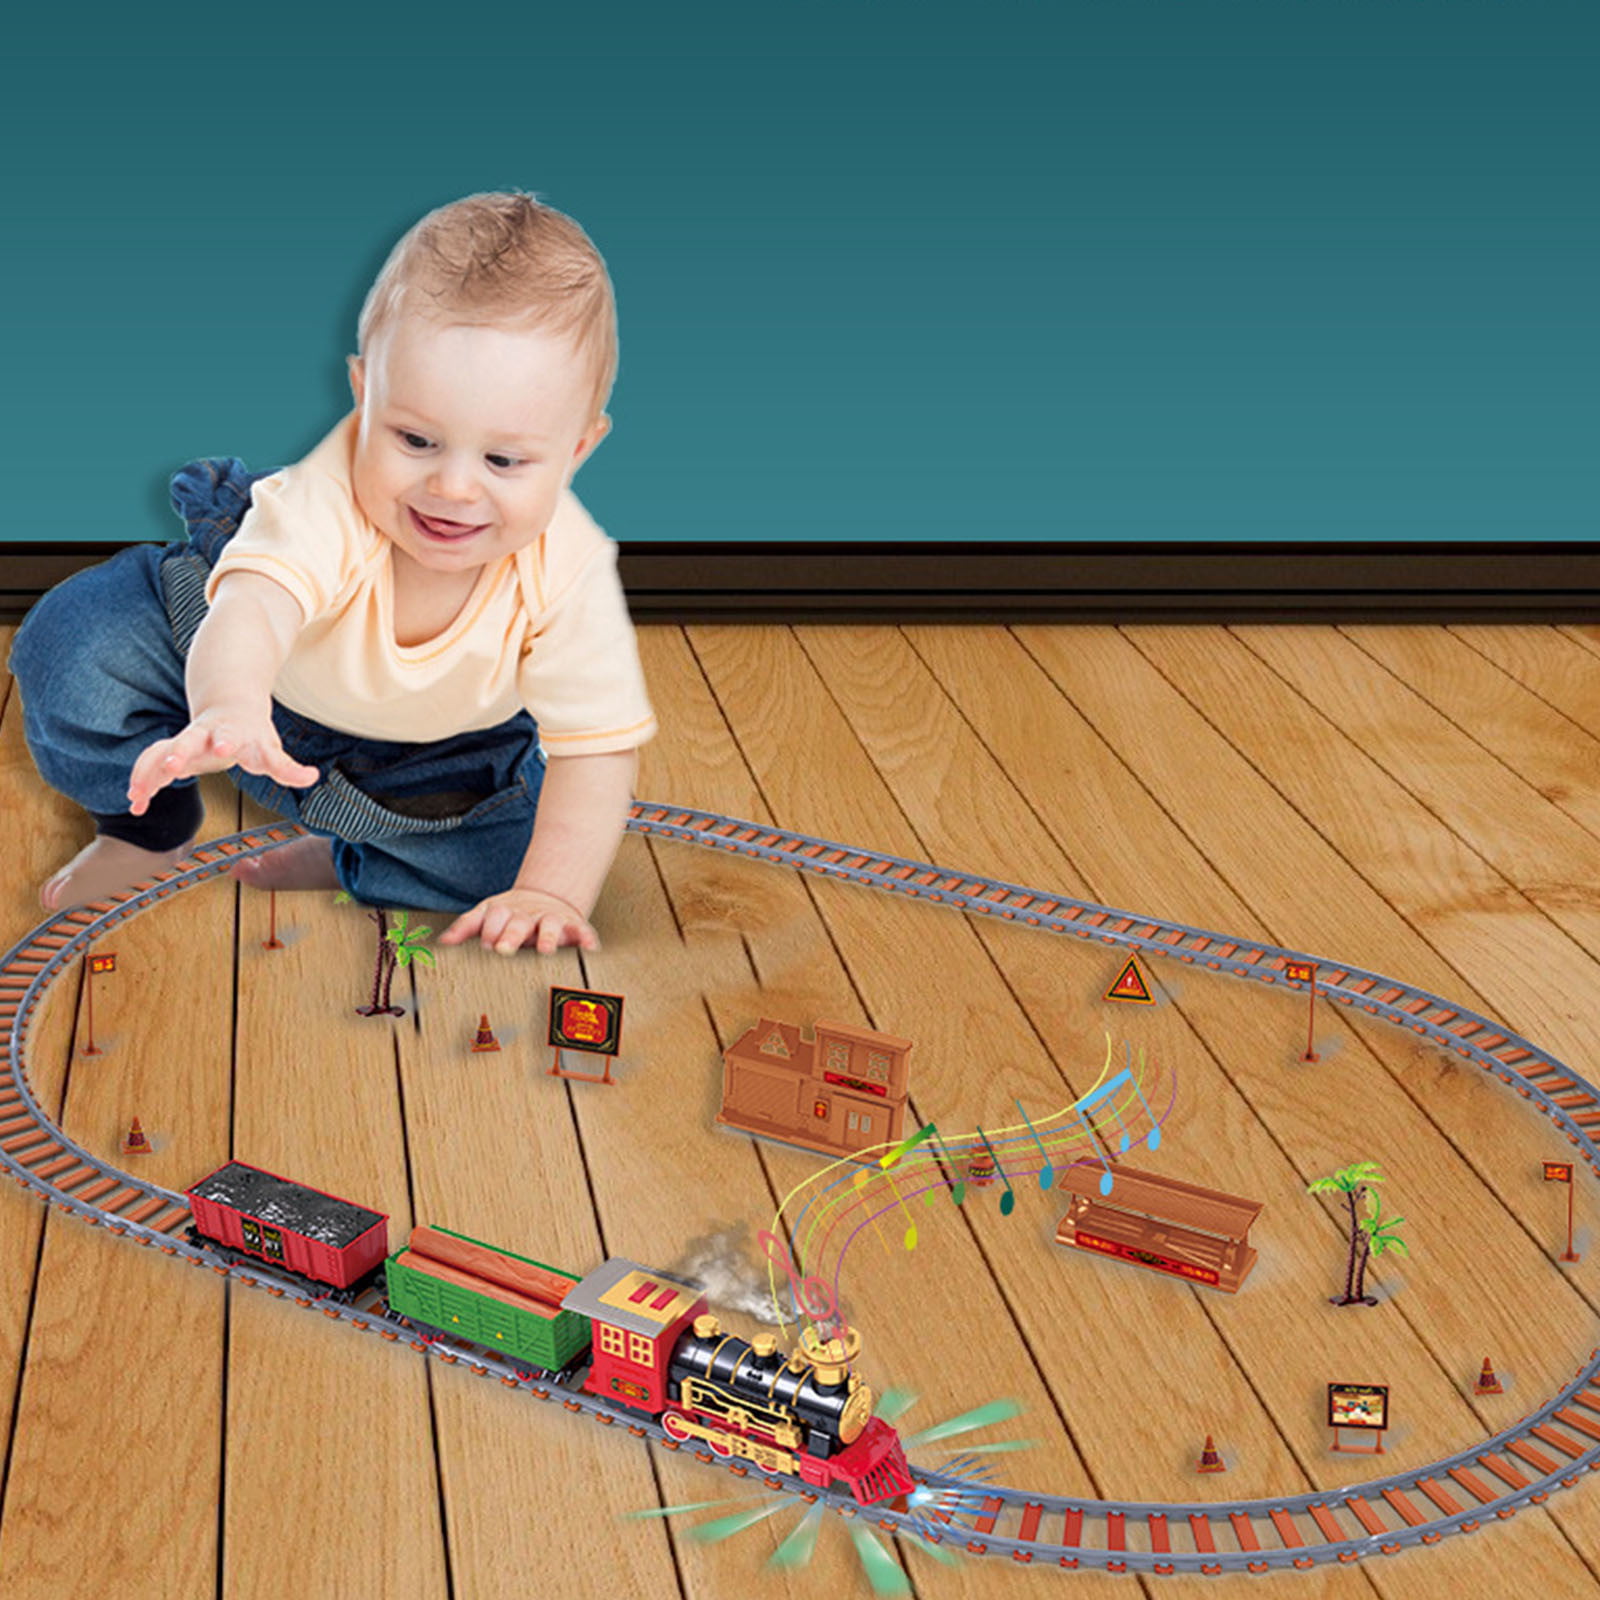 Details about   Electric Train Set Battery Powered with Light and Sound Locomotive Engine Toy 